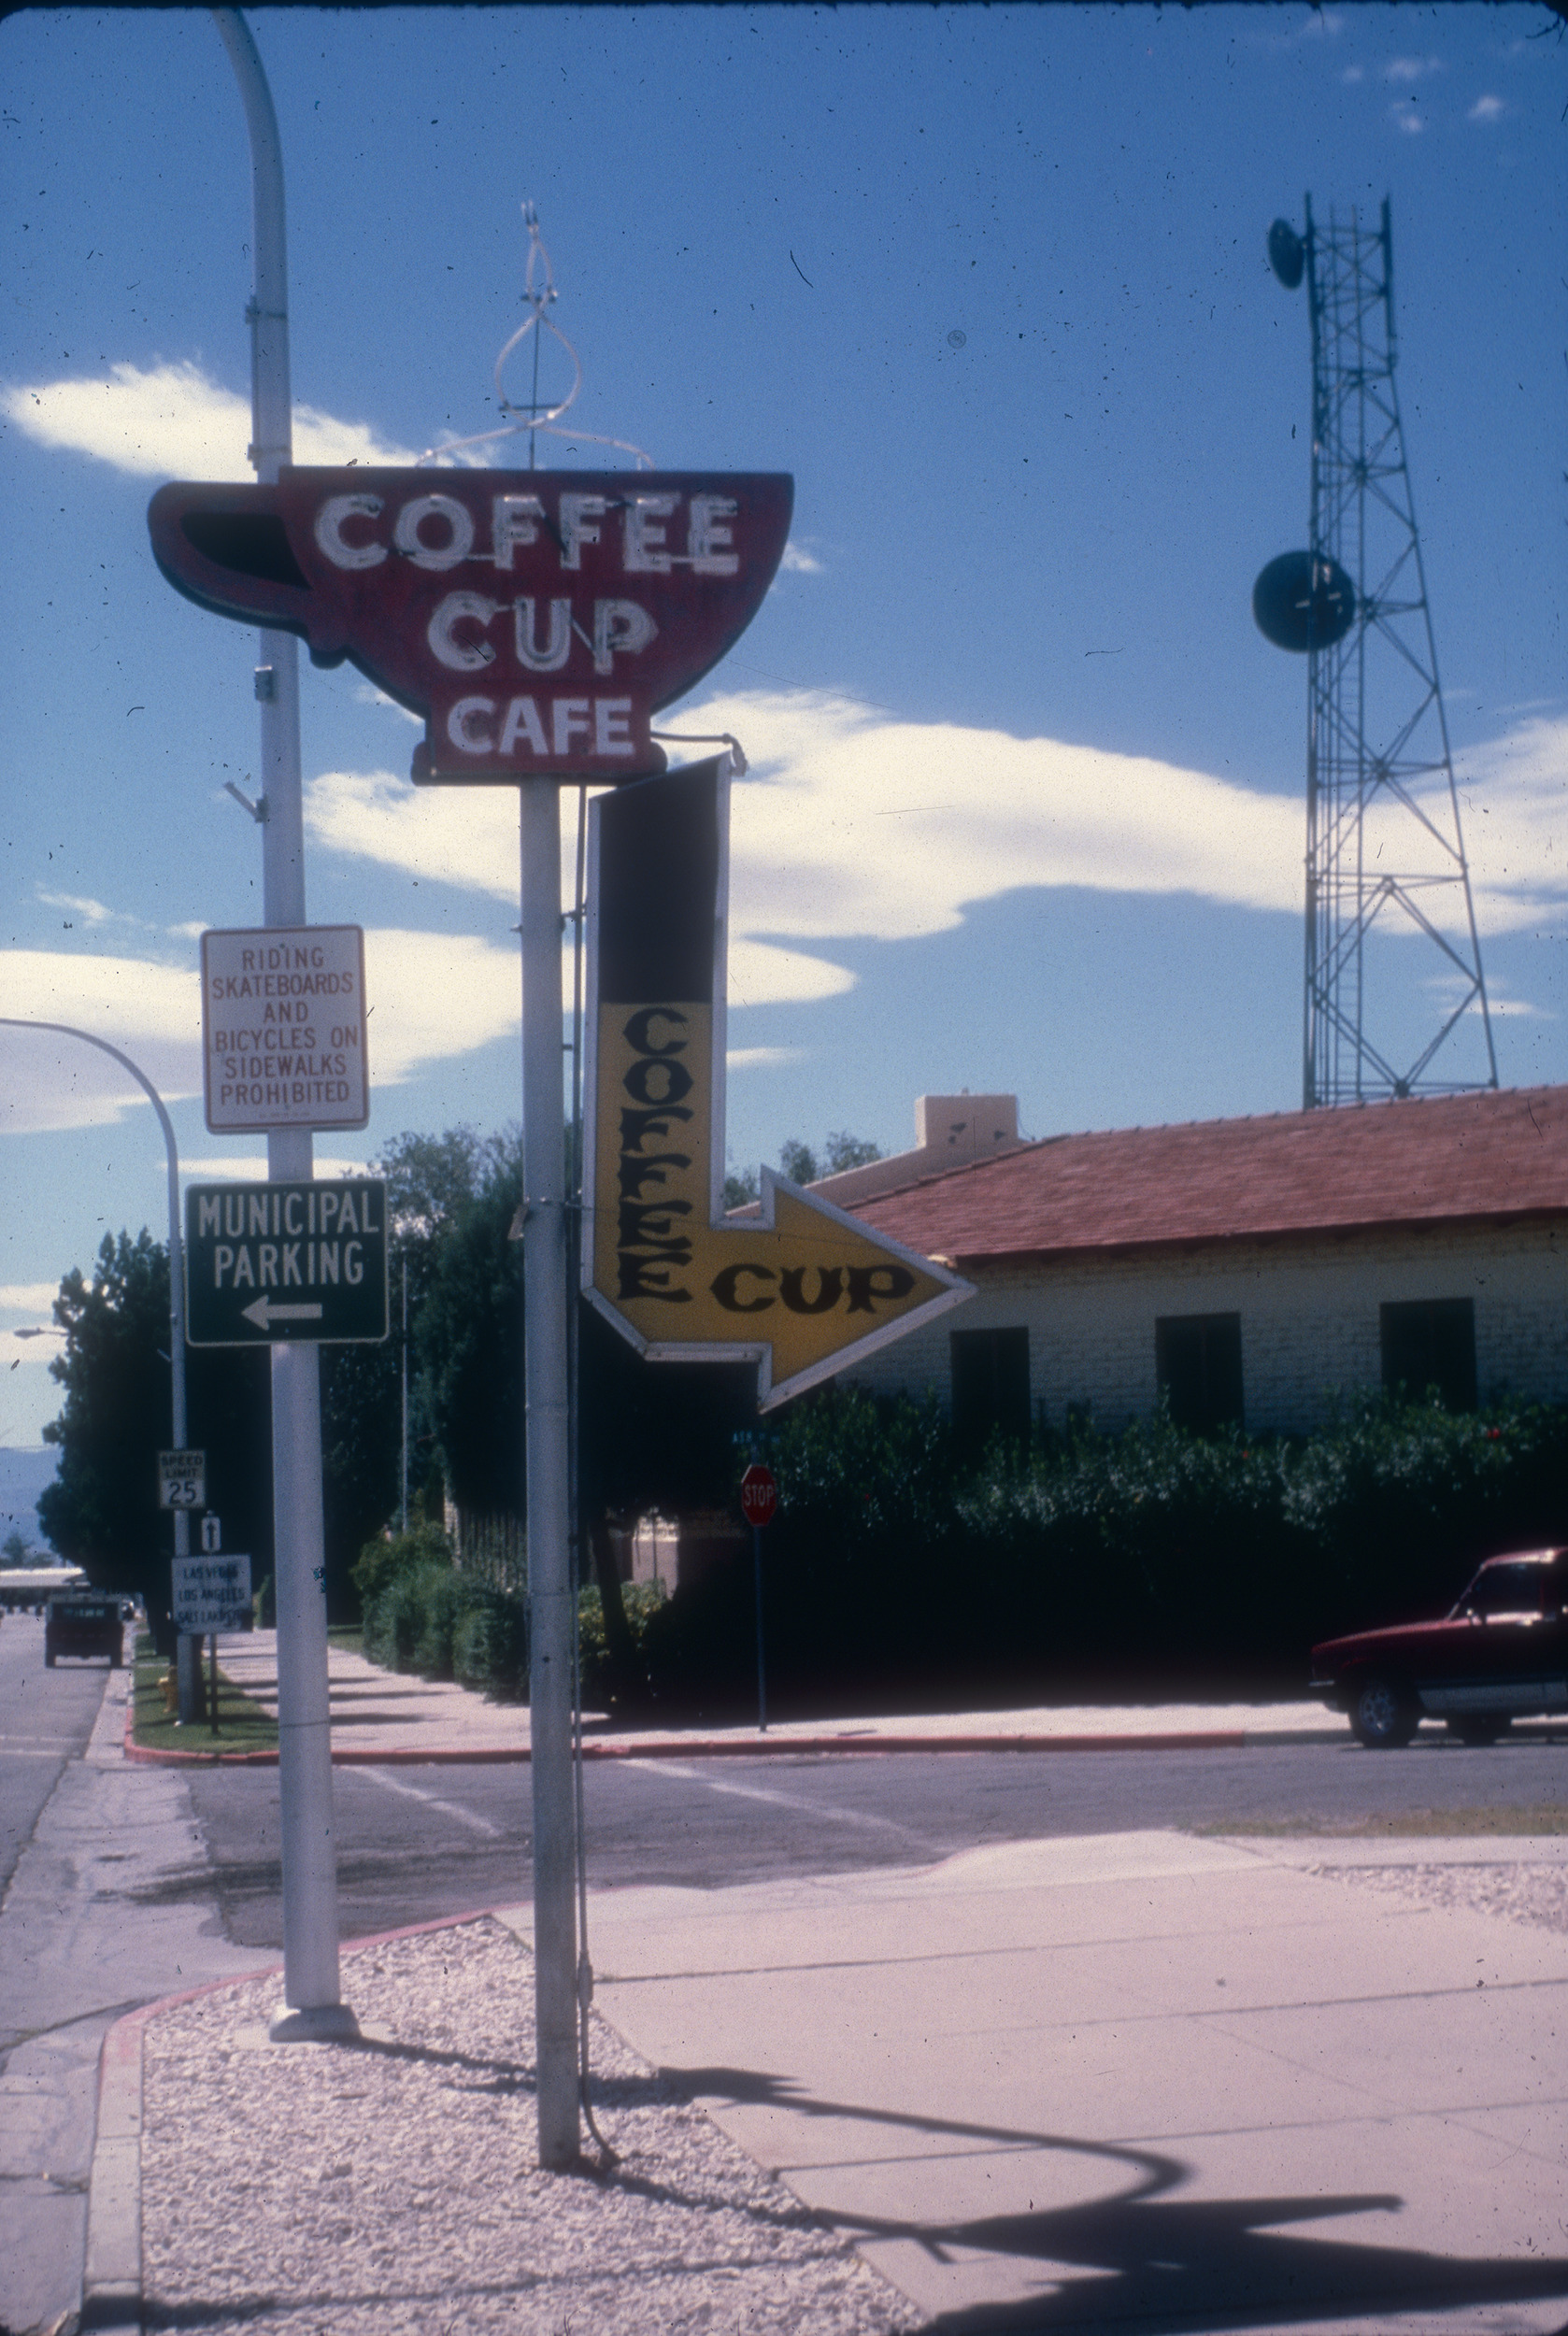 Slide of the neon signs for the Coffee Cup Cafe, Boulder City, Nevada, 1986